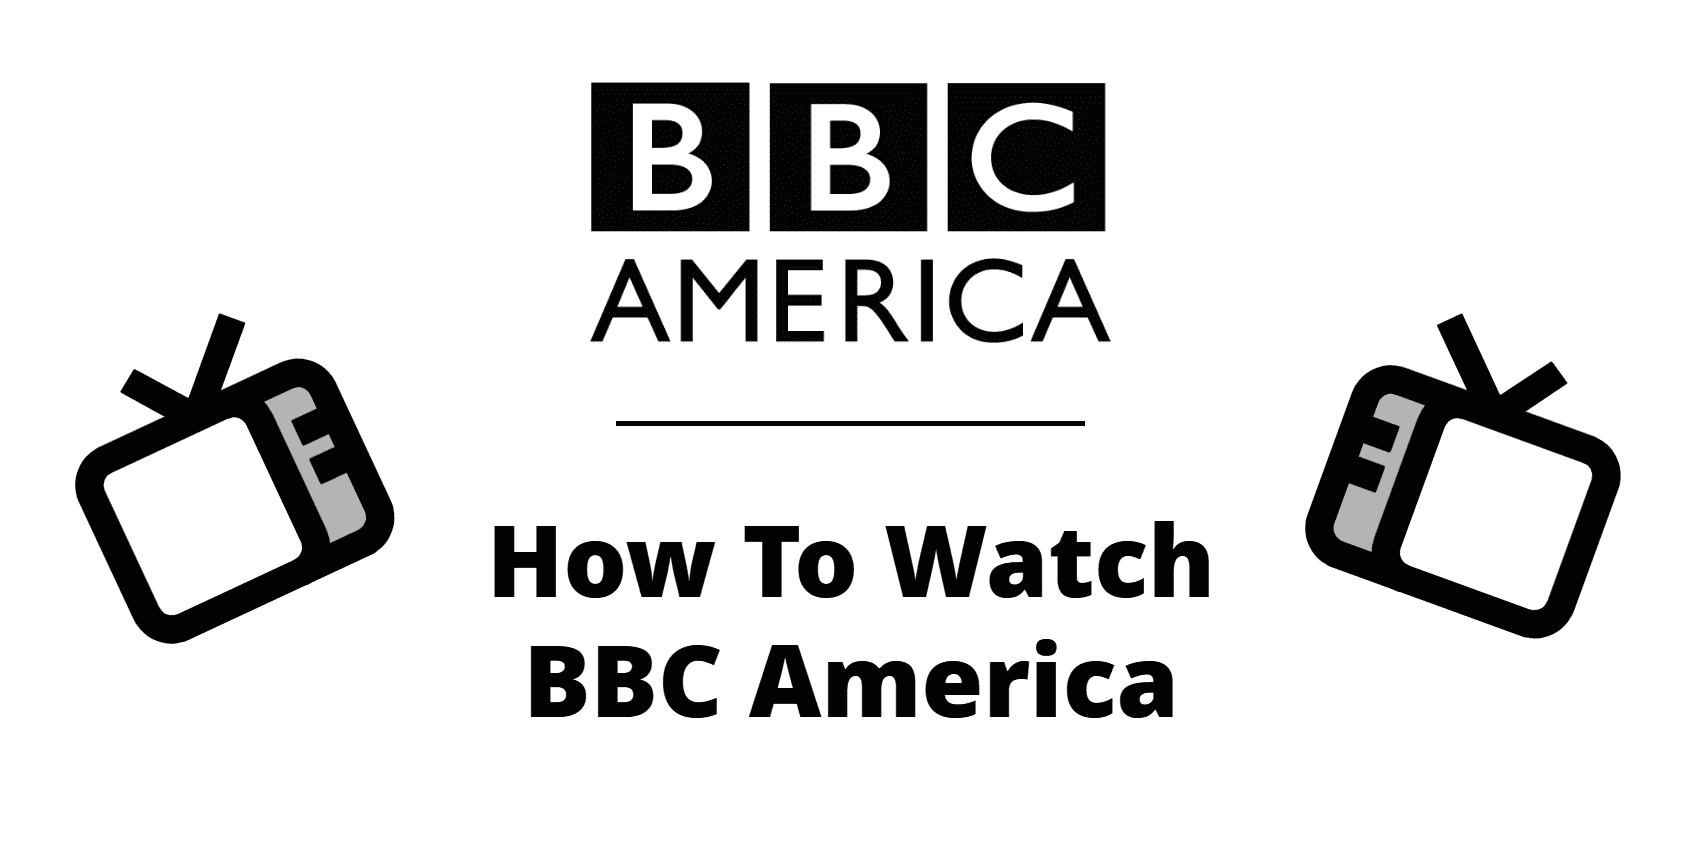 BBC America All the Streaming Options so You Can Watch Online